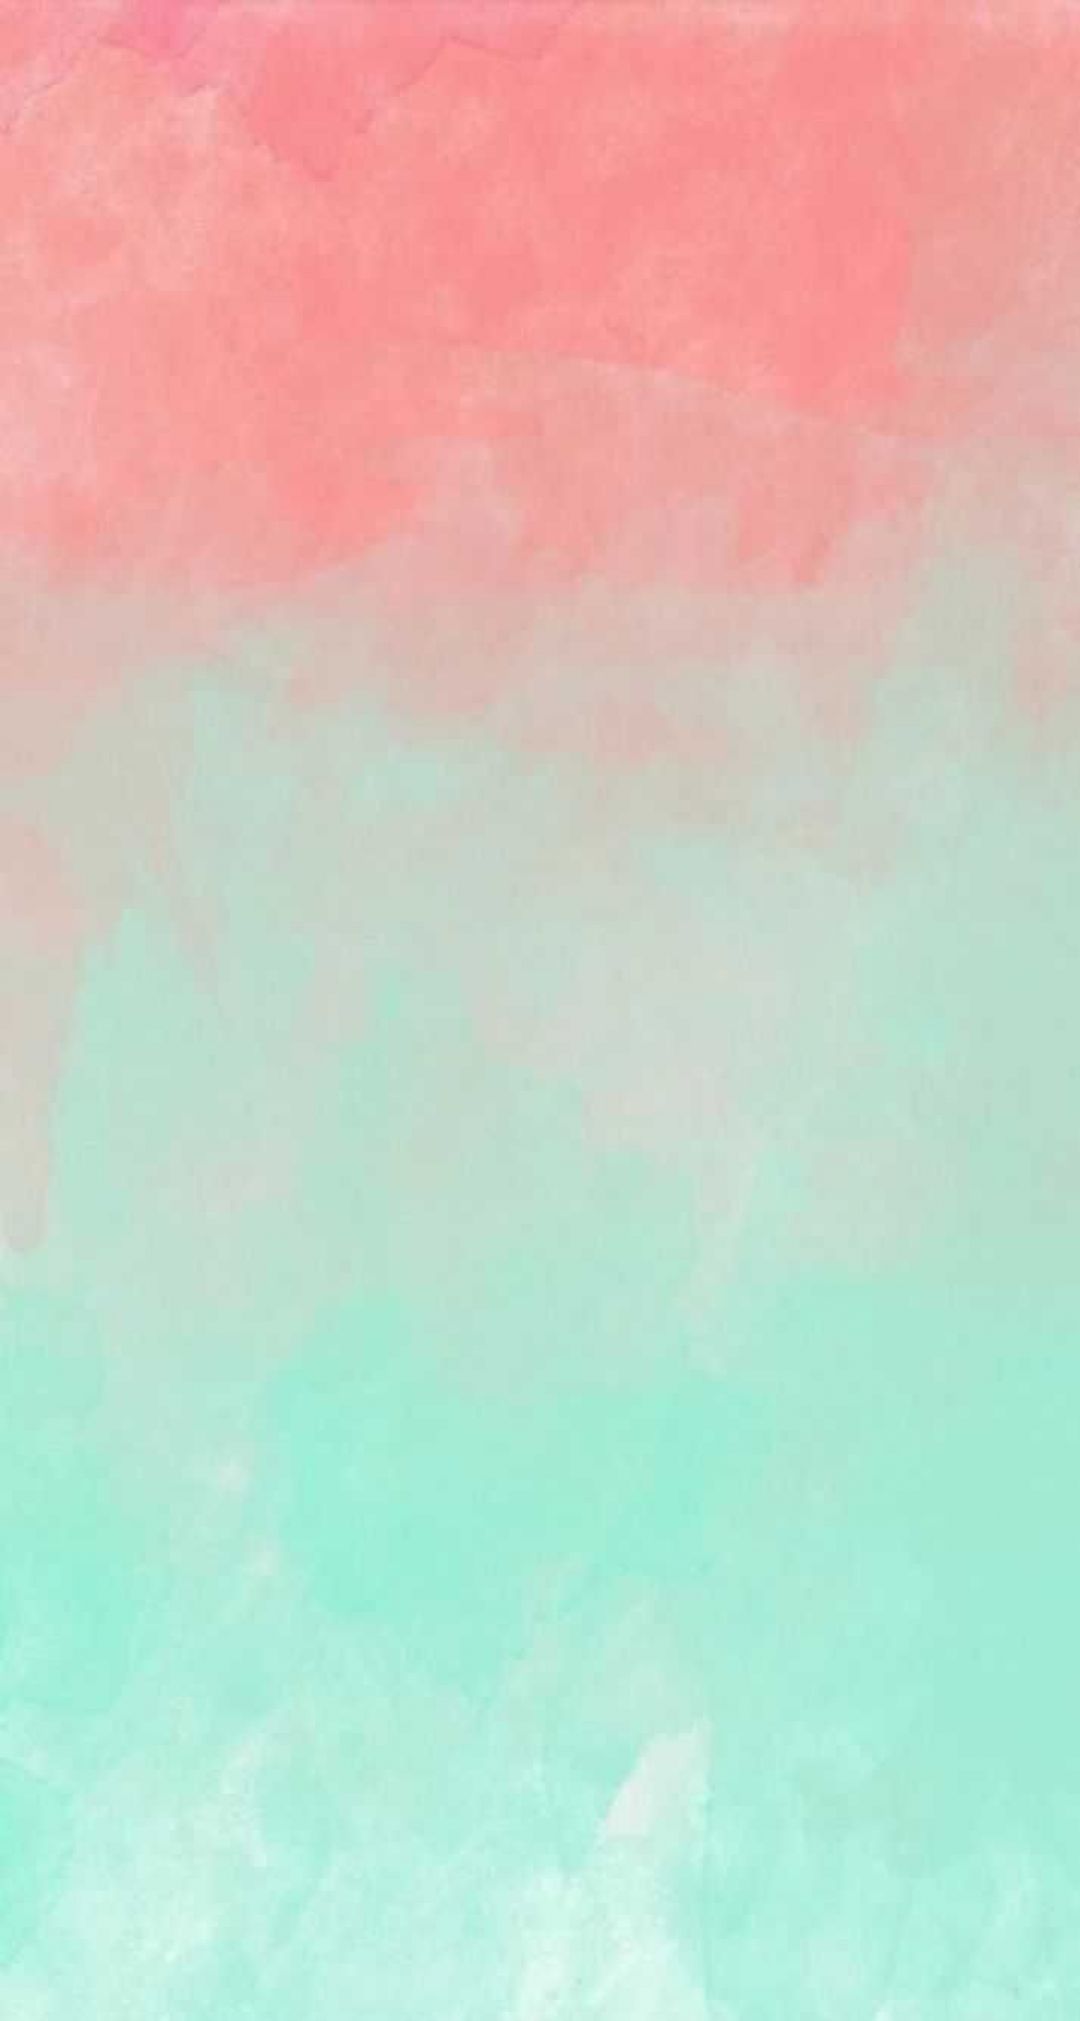 A watercolor background with pink and green - Mint green